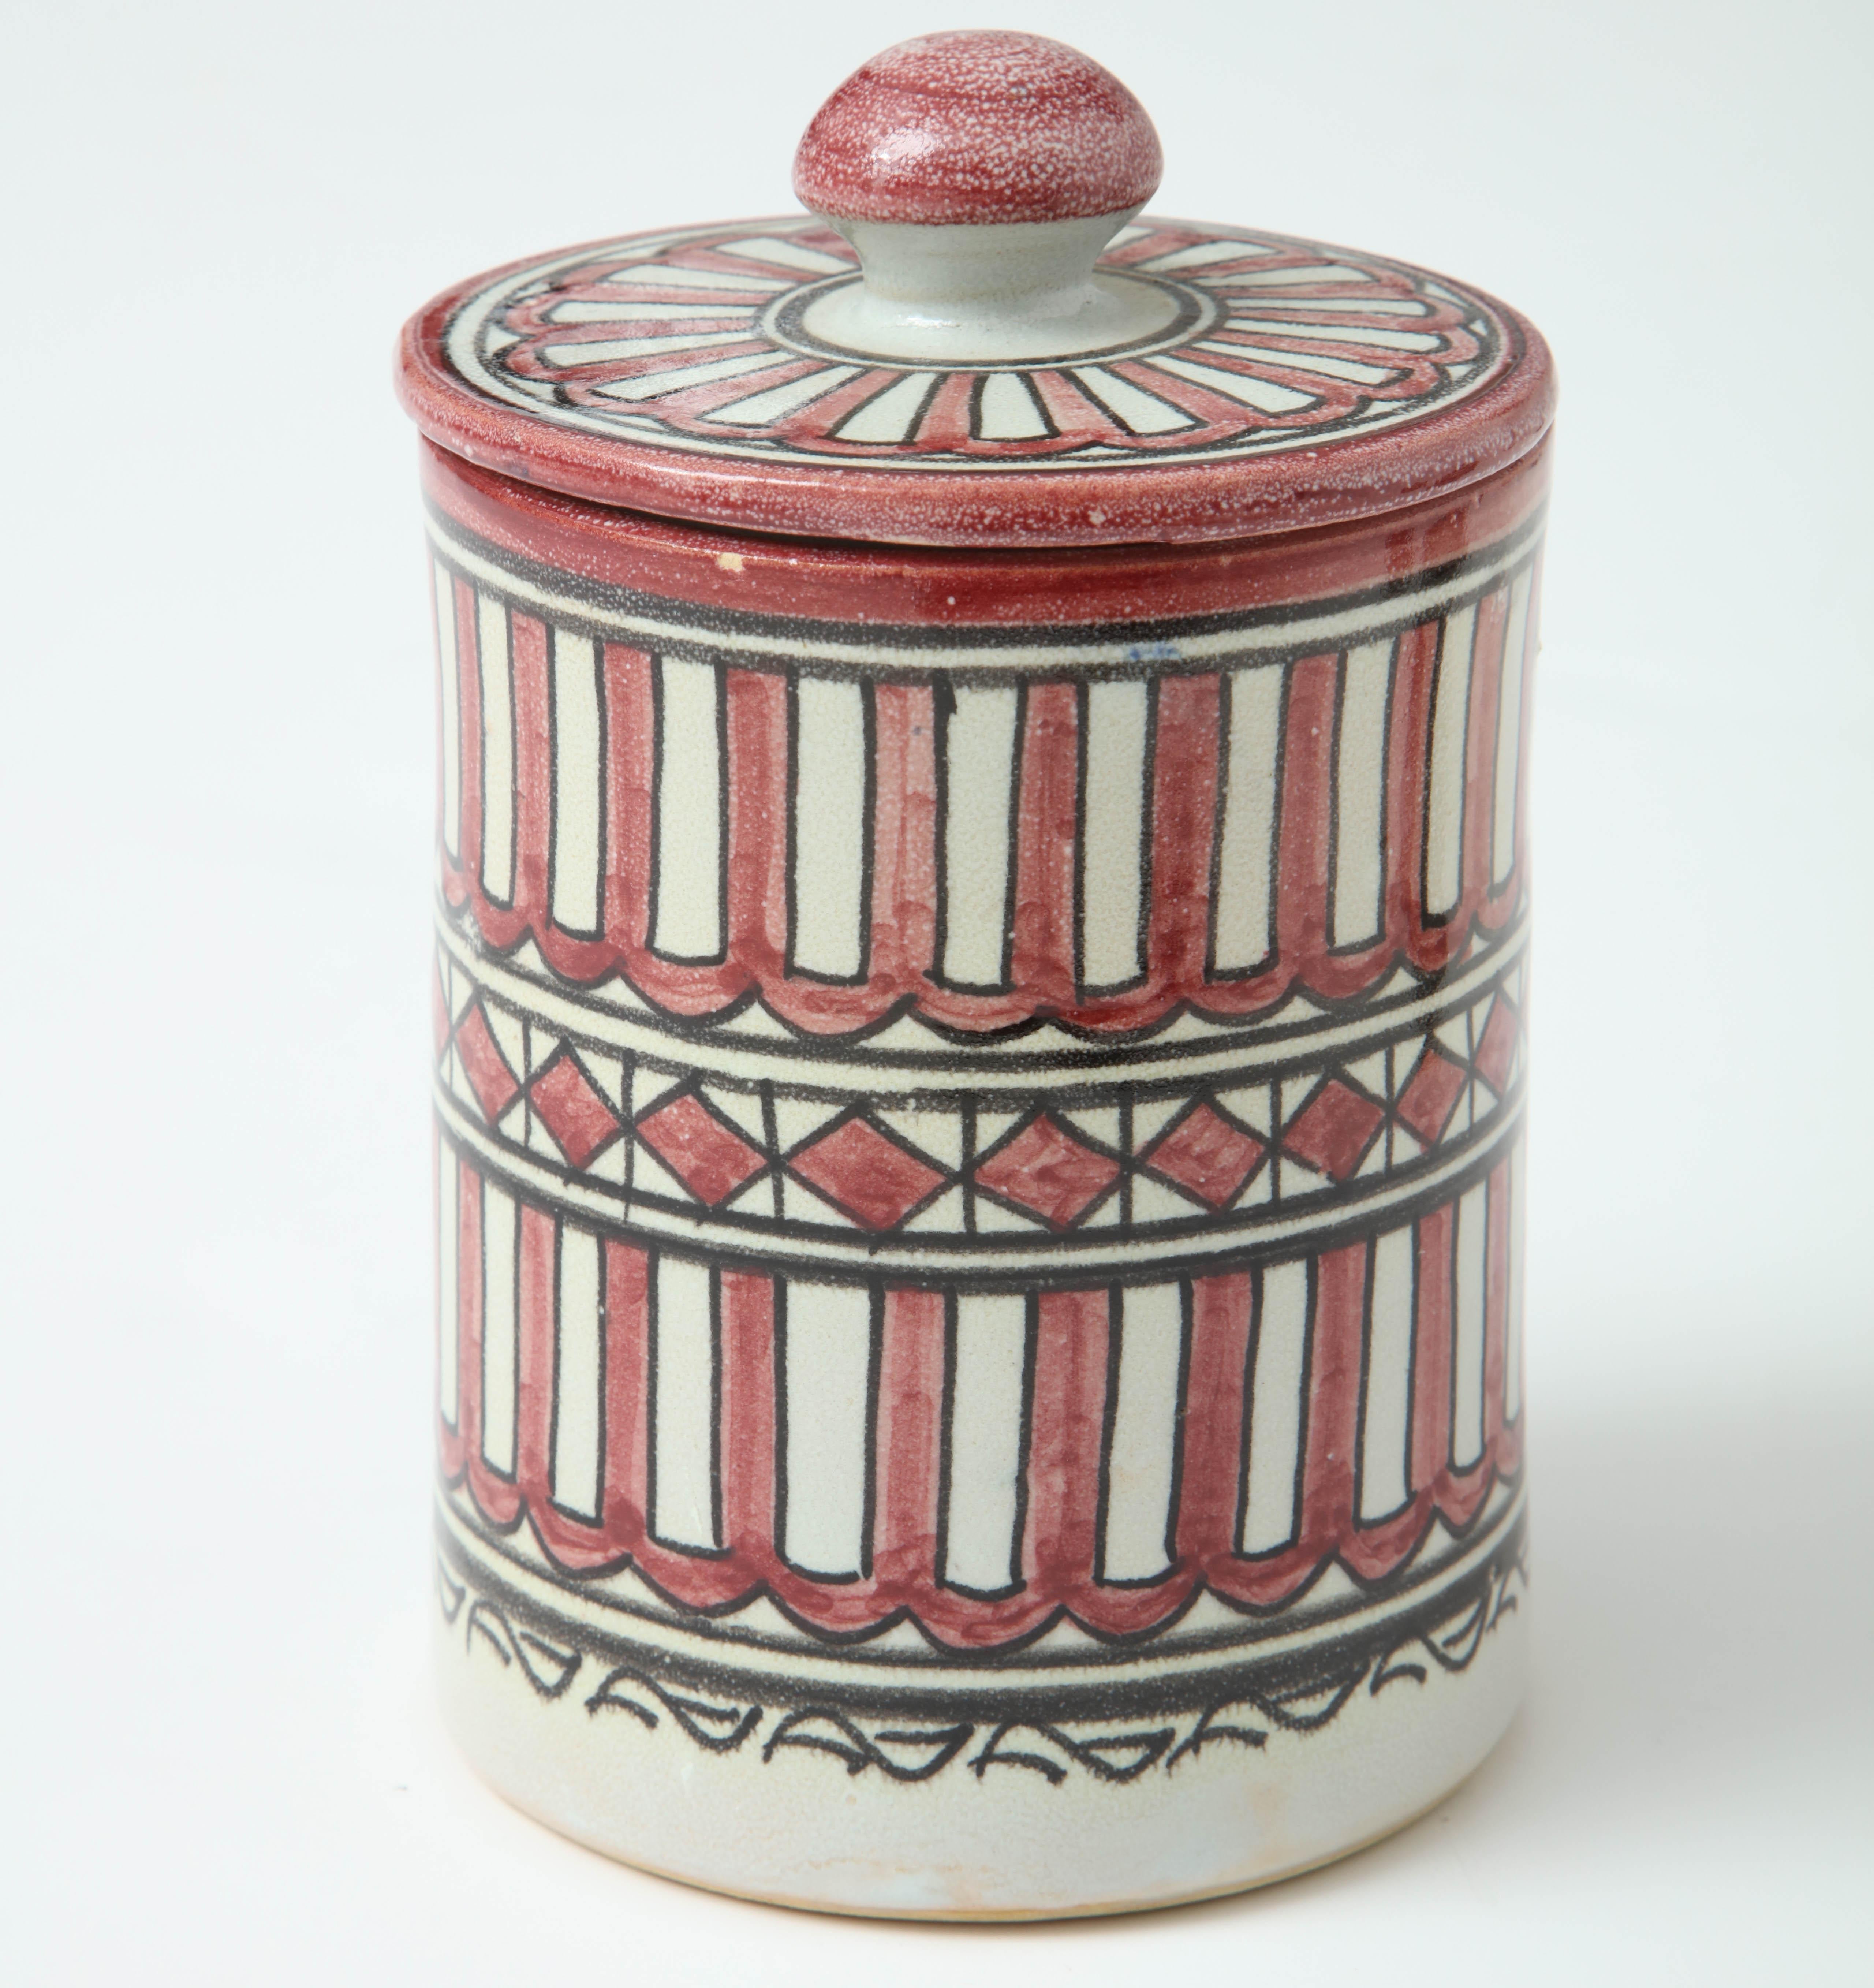 Pottery from Morocco. The design is inspired from Swedish midcentury pottery like Stig Lindberg.